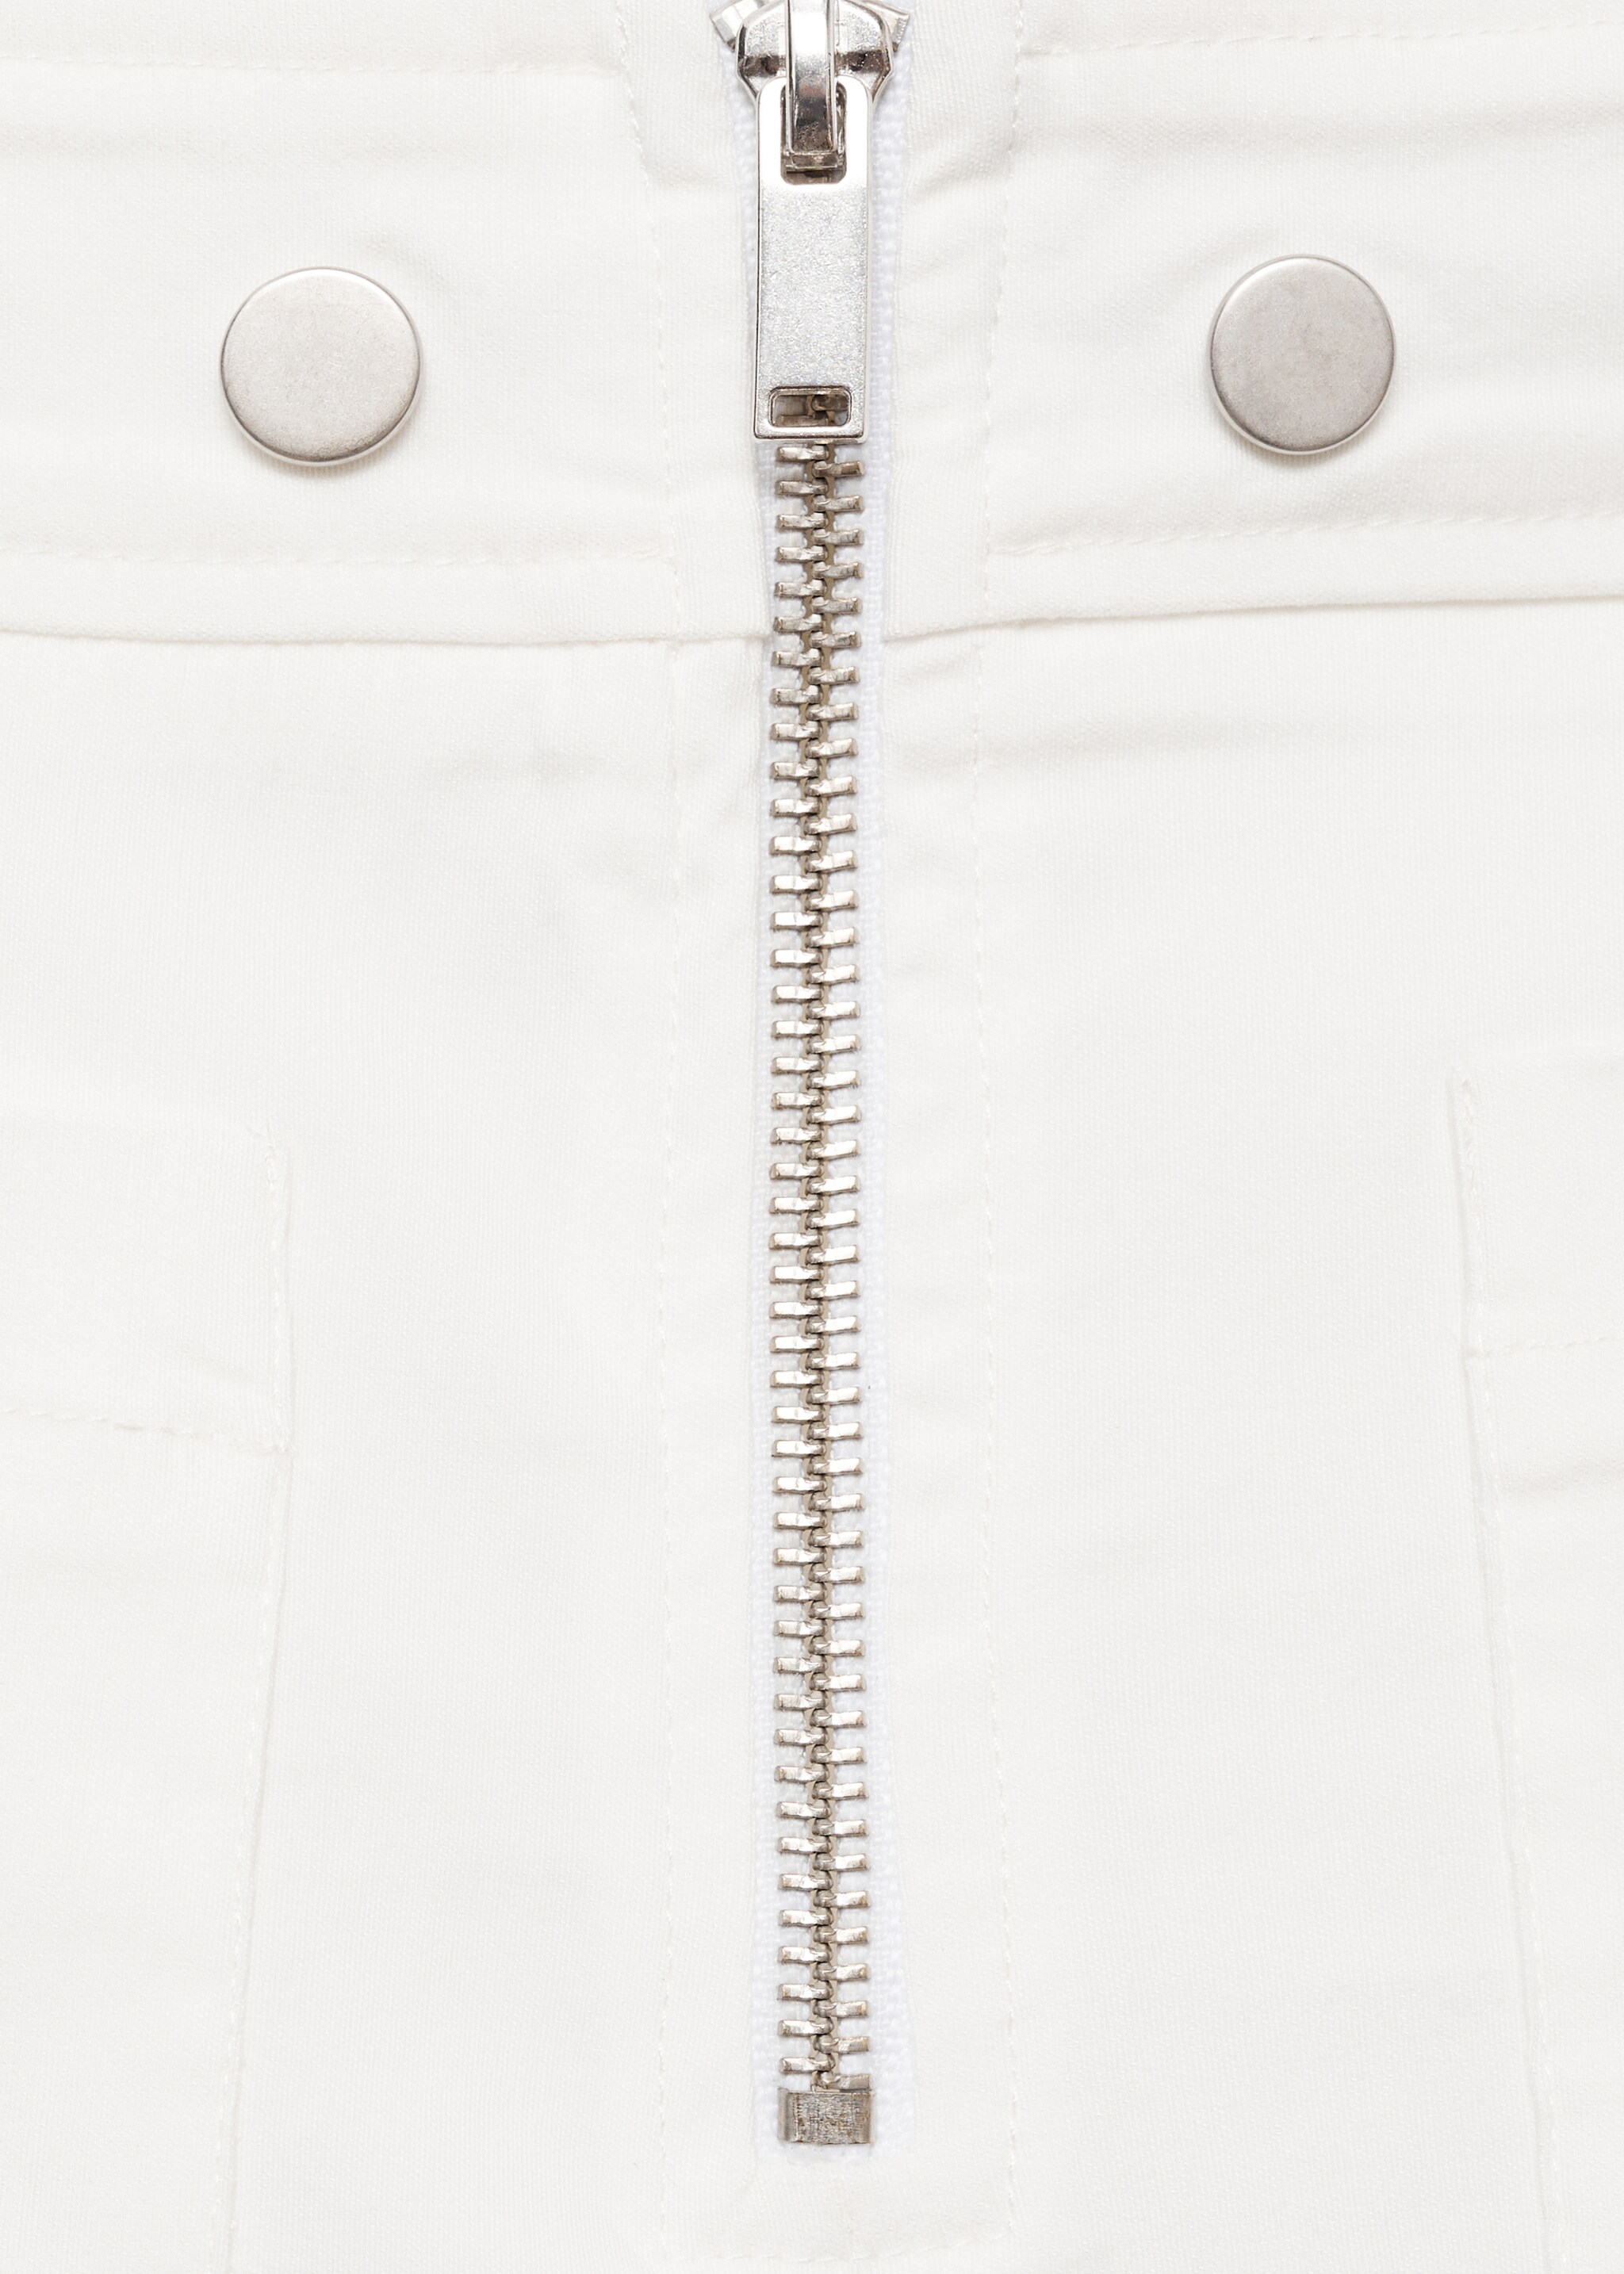 Capri trousers with decorative buttons - Details of the article 8